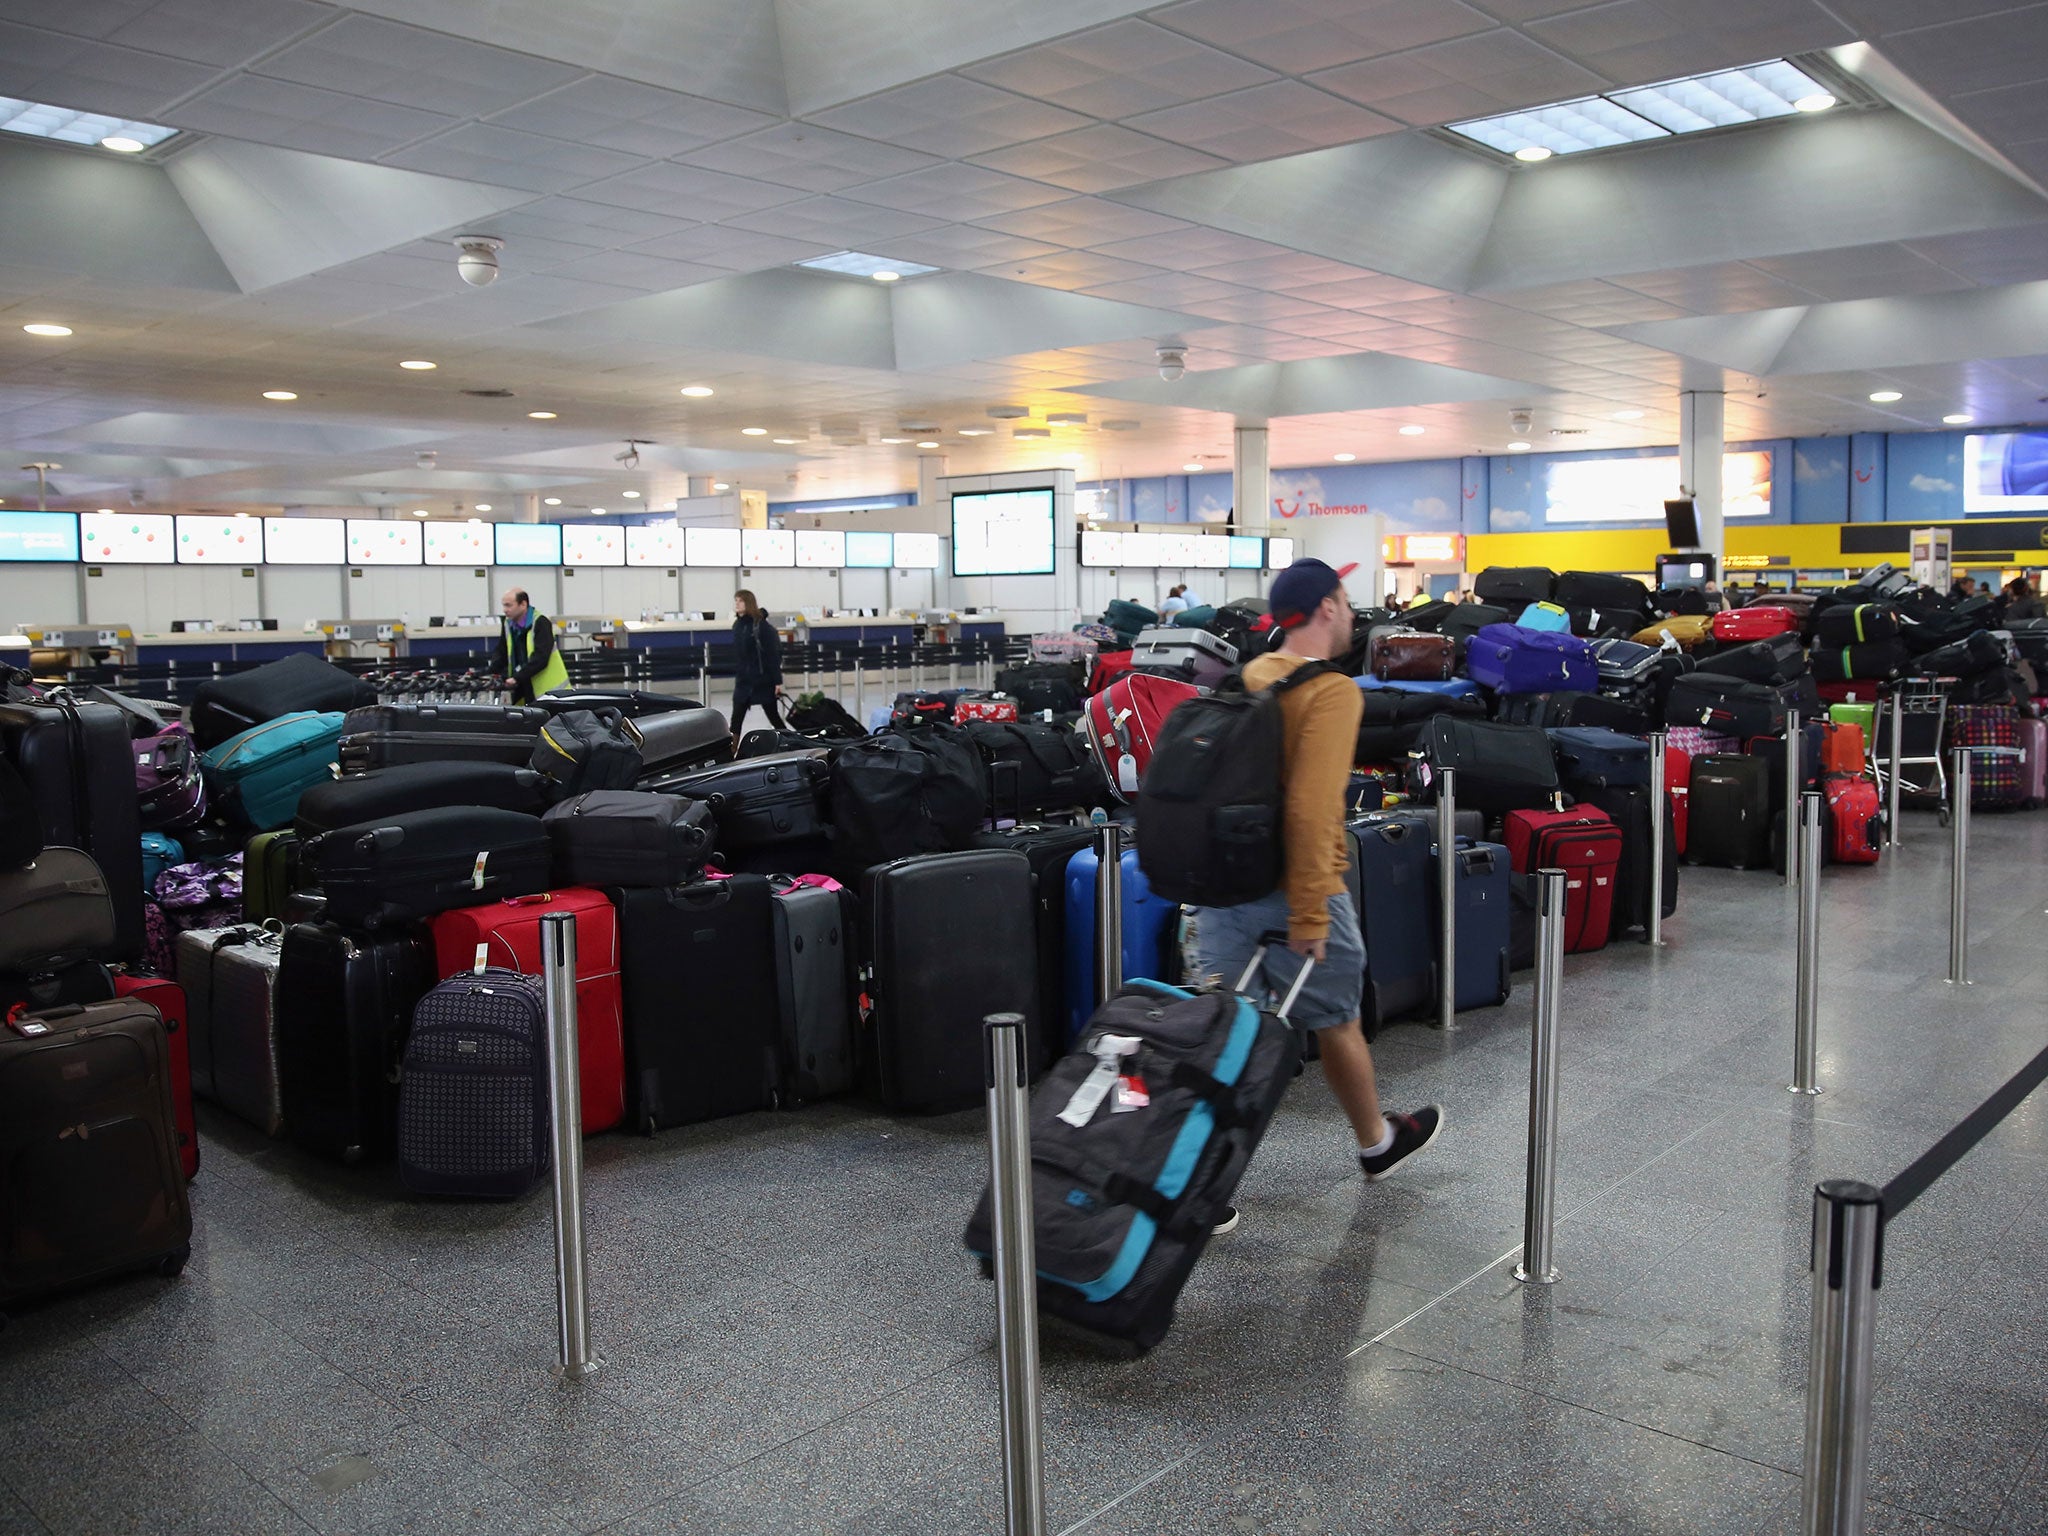 Gatwick Airport has up to 60 staff on standby to avoid baggage chaos